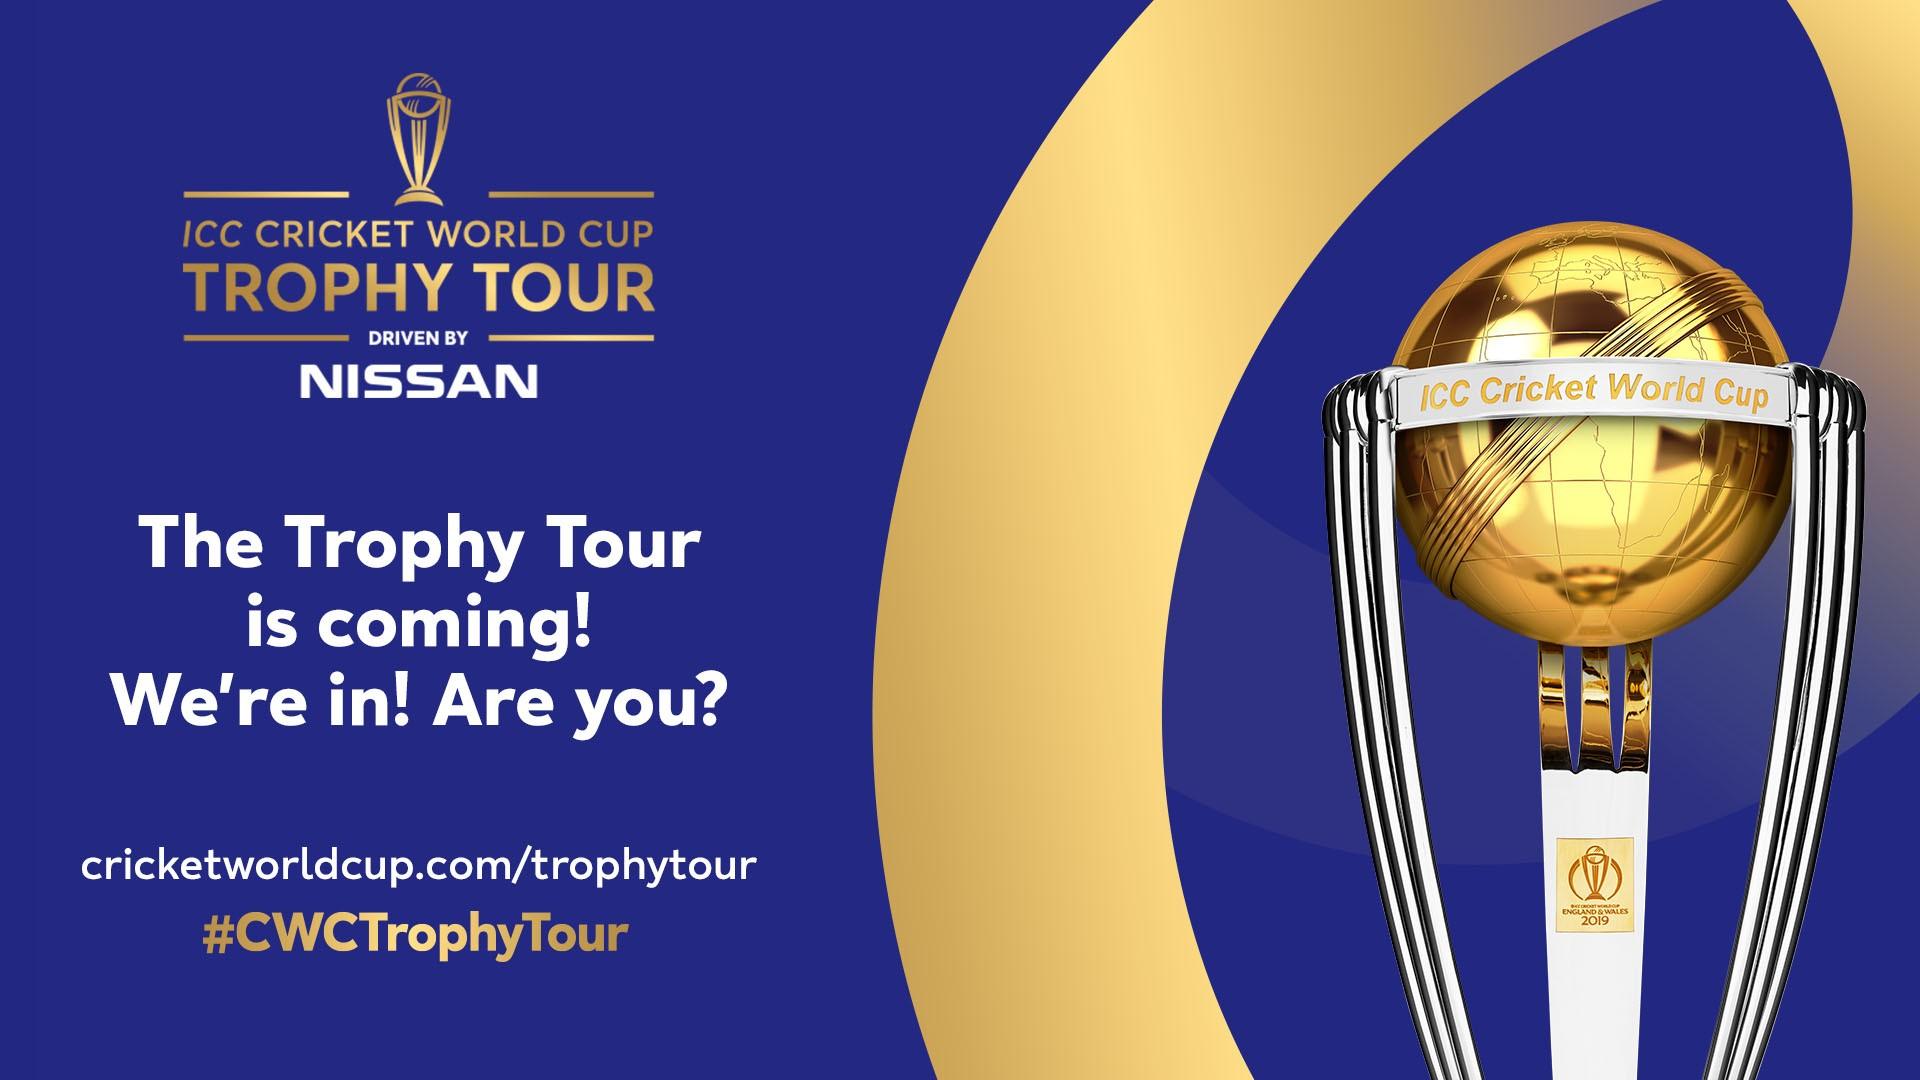 ICC CRICKET WORLD CUP TROPHY TOUR TO VISIT LEEDS, AS PART OF 100 DAY